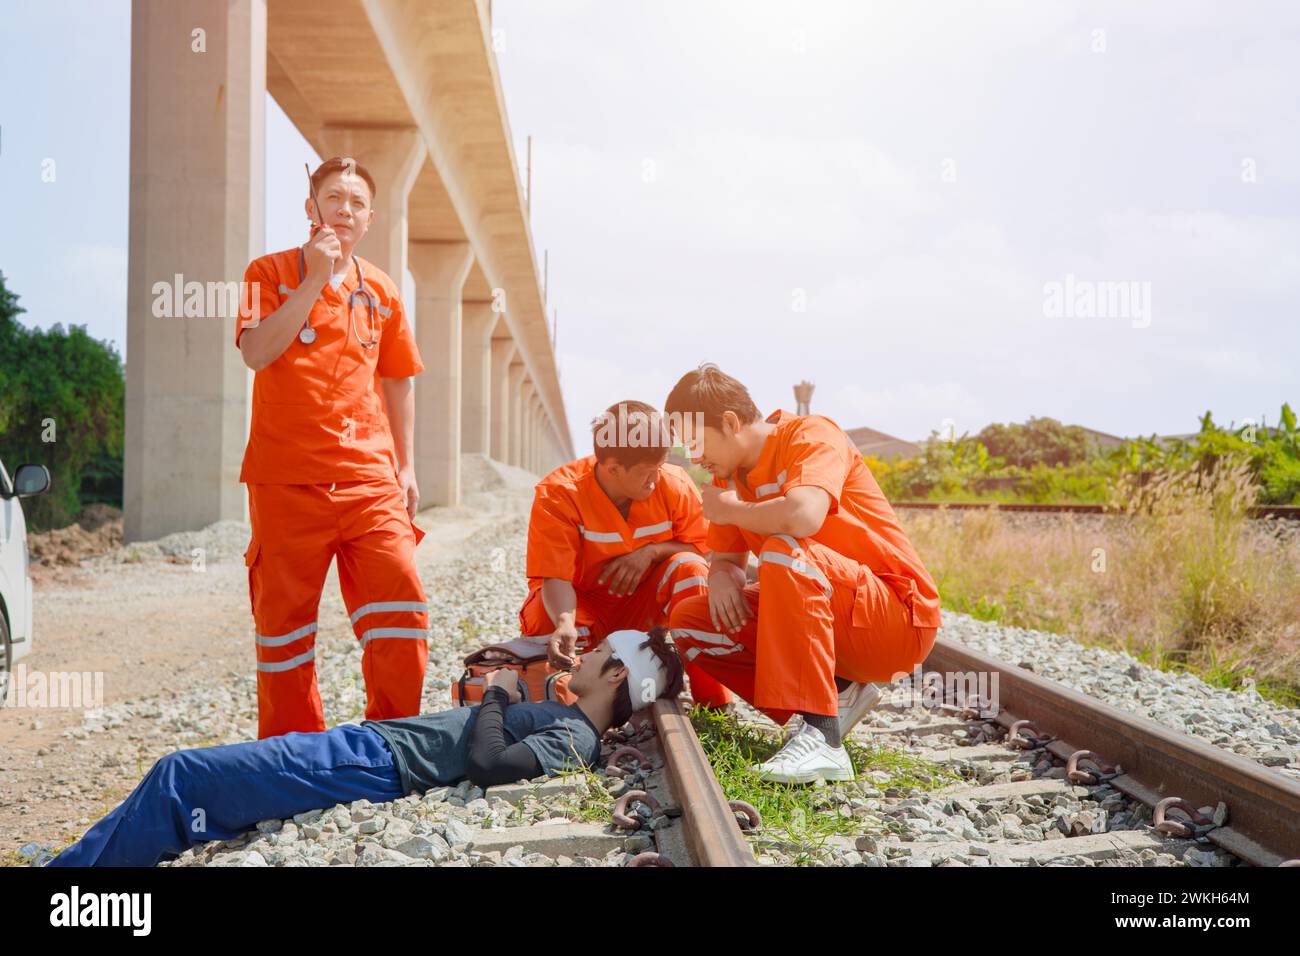 paramedic medical emergency doctor team working in action help first aid save people life at accident site outdoors Stock Photo